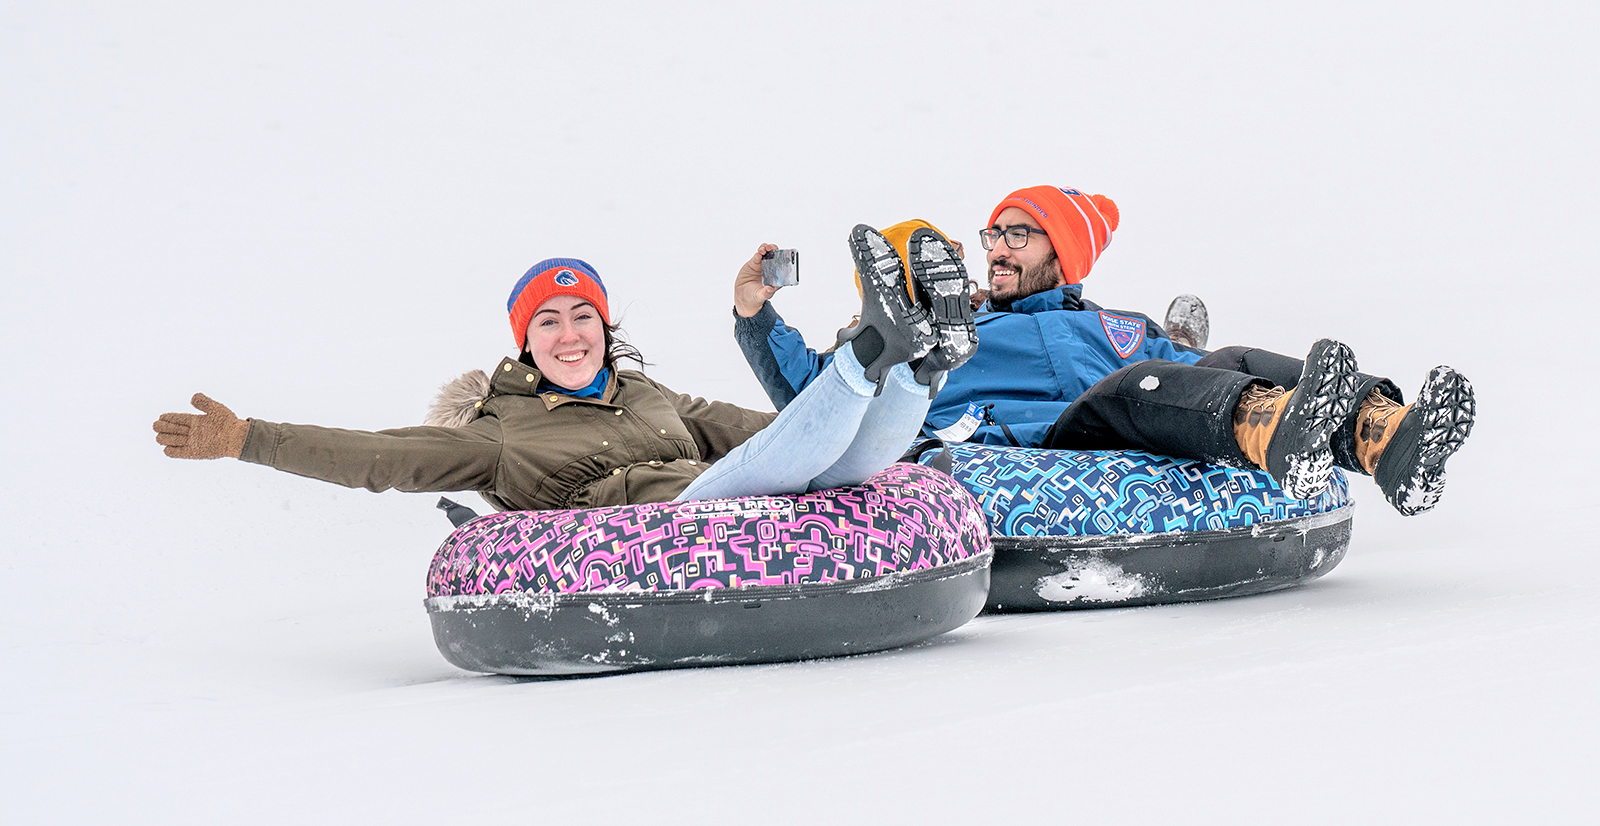 Students on inner tubes in the snow